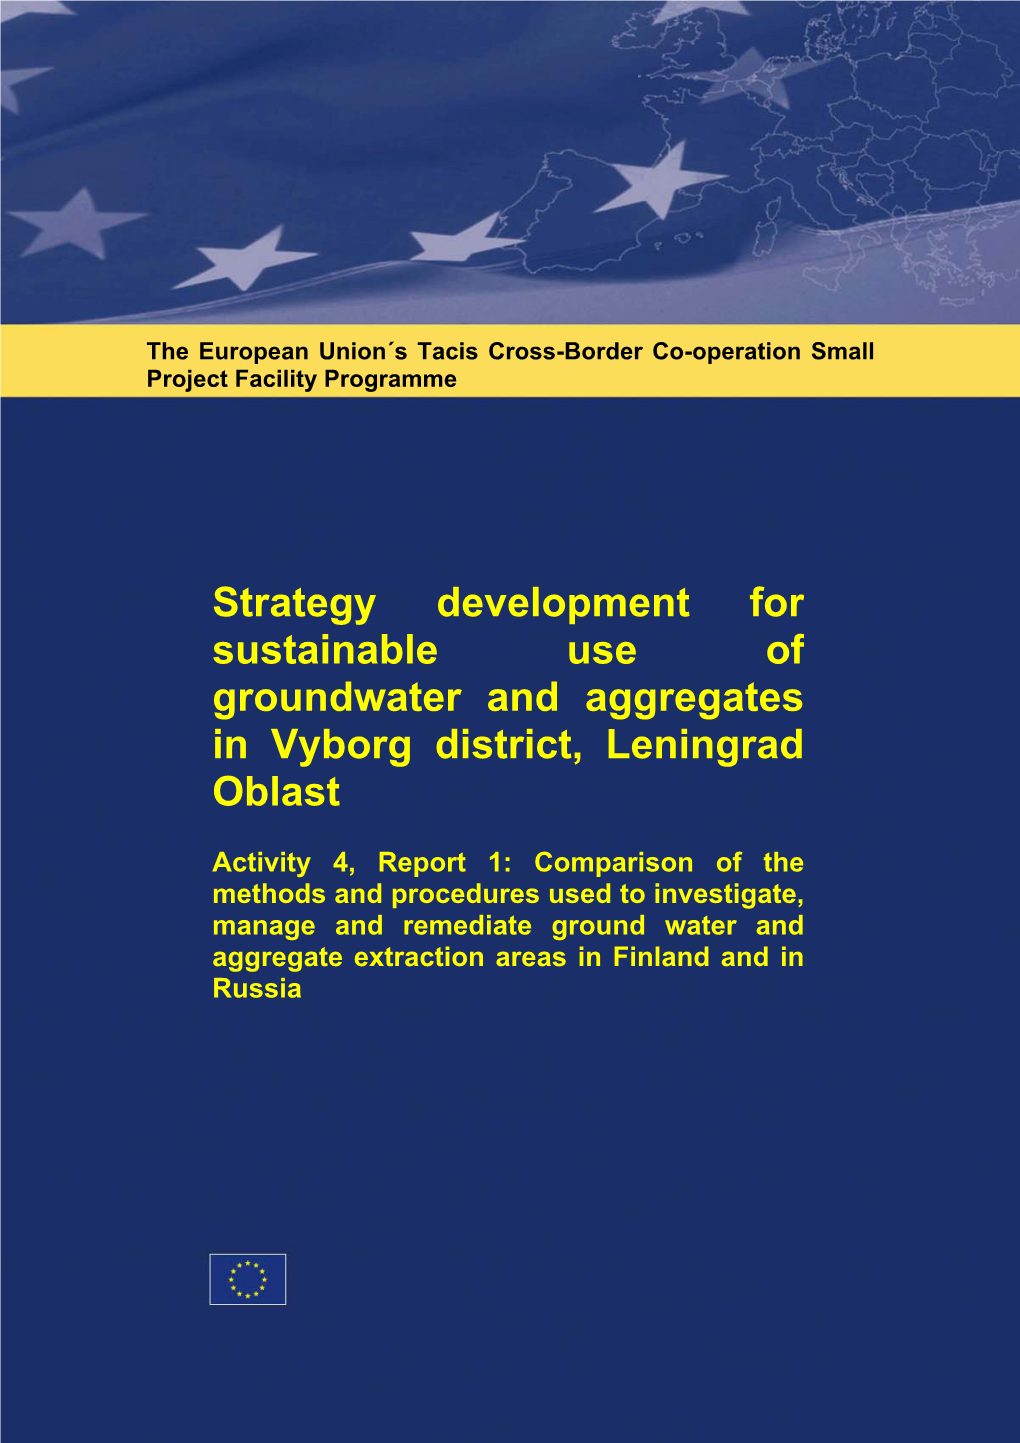 Strategy Development for Sustainable Use of Groundwater and Aggretgates in Vyborg District